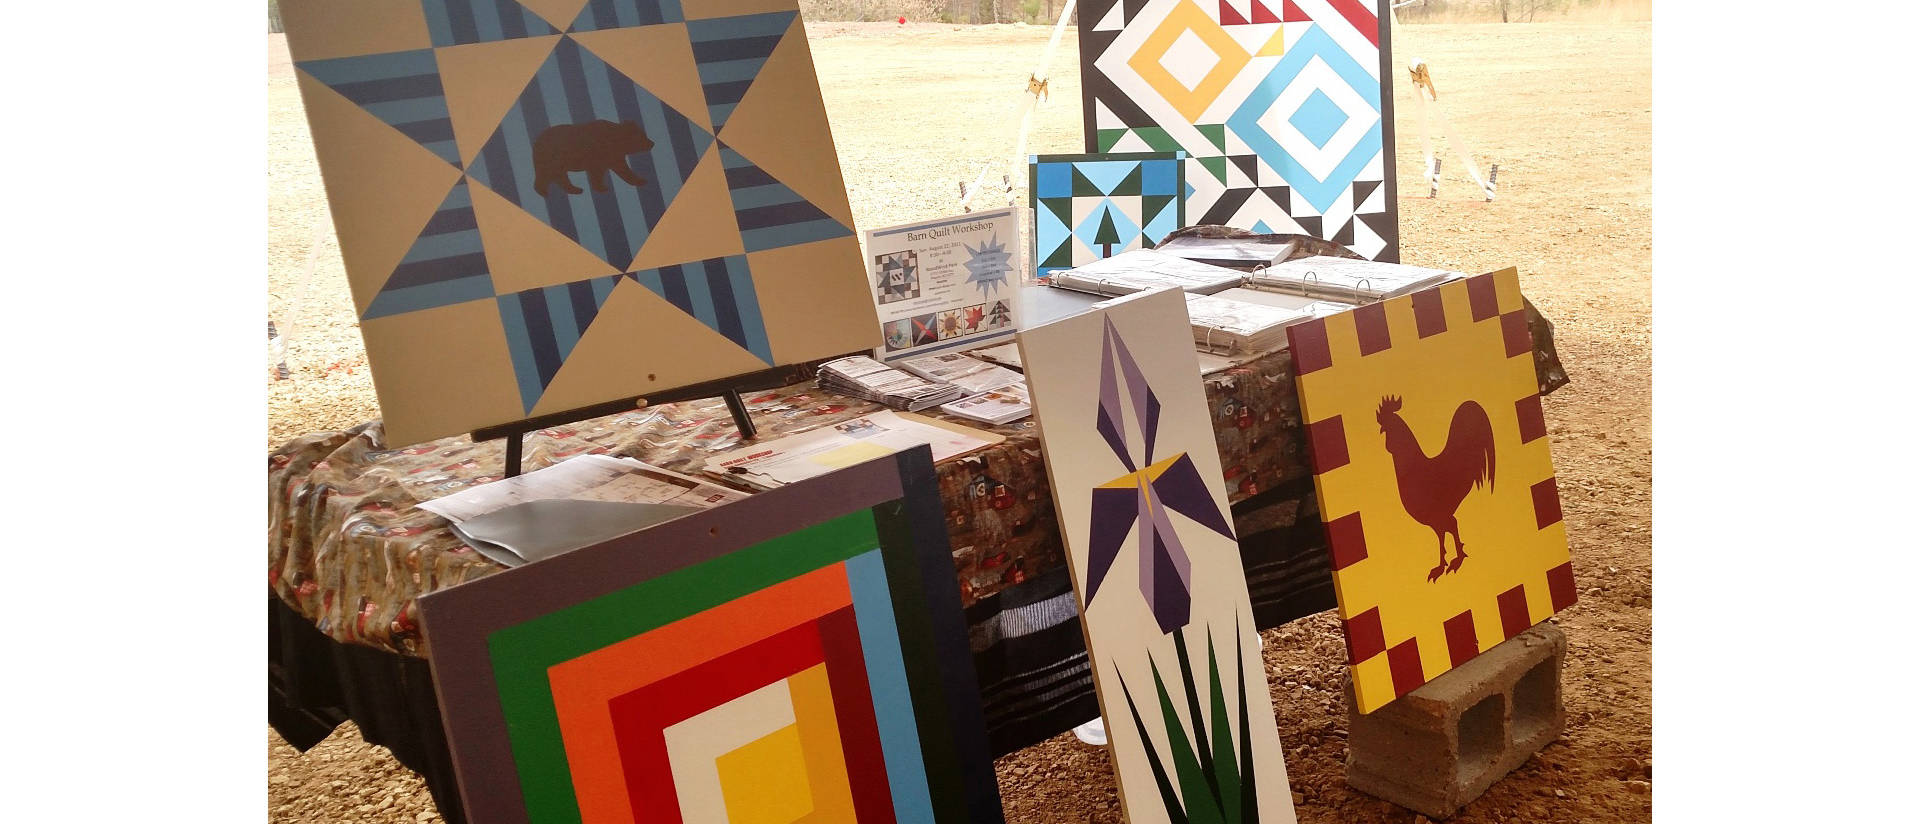 Several examples of barn quilt patterns were on display at the WoodWind Park Performance & Event Venue in Wheeler as part of their first craft fair in May. (Submitted photo)